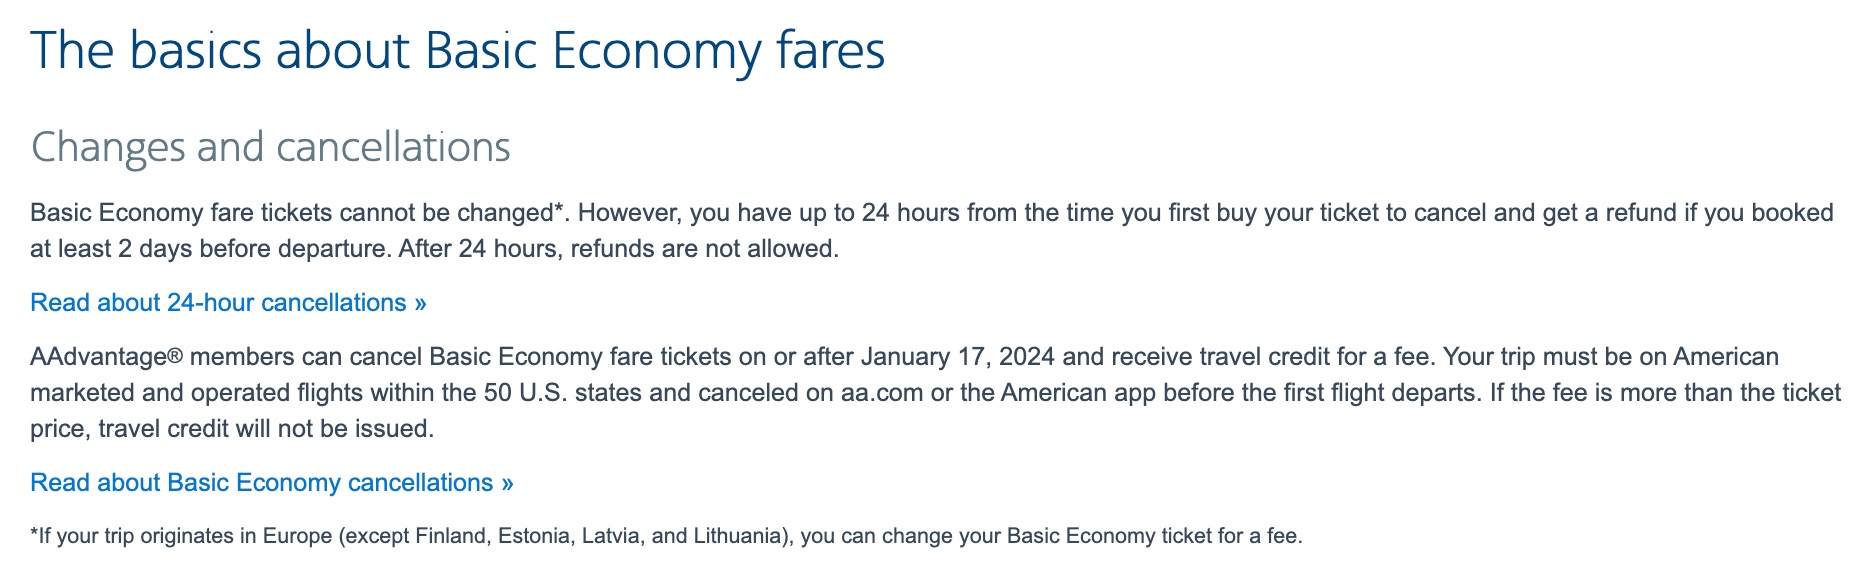 American Airlines cancellation policy for basic economy fares